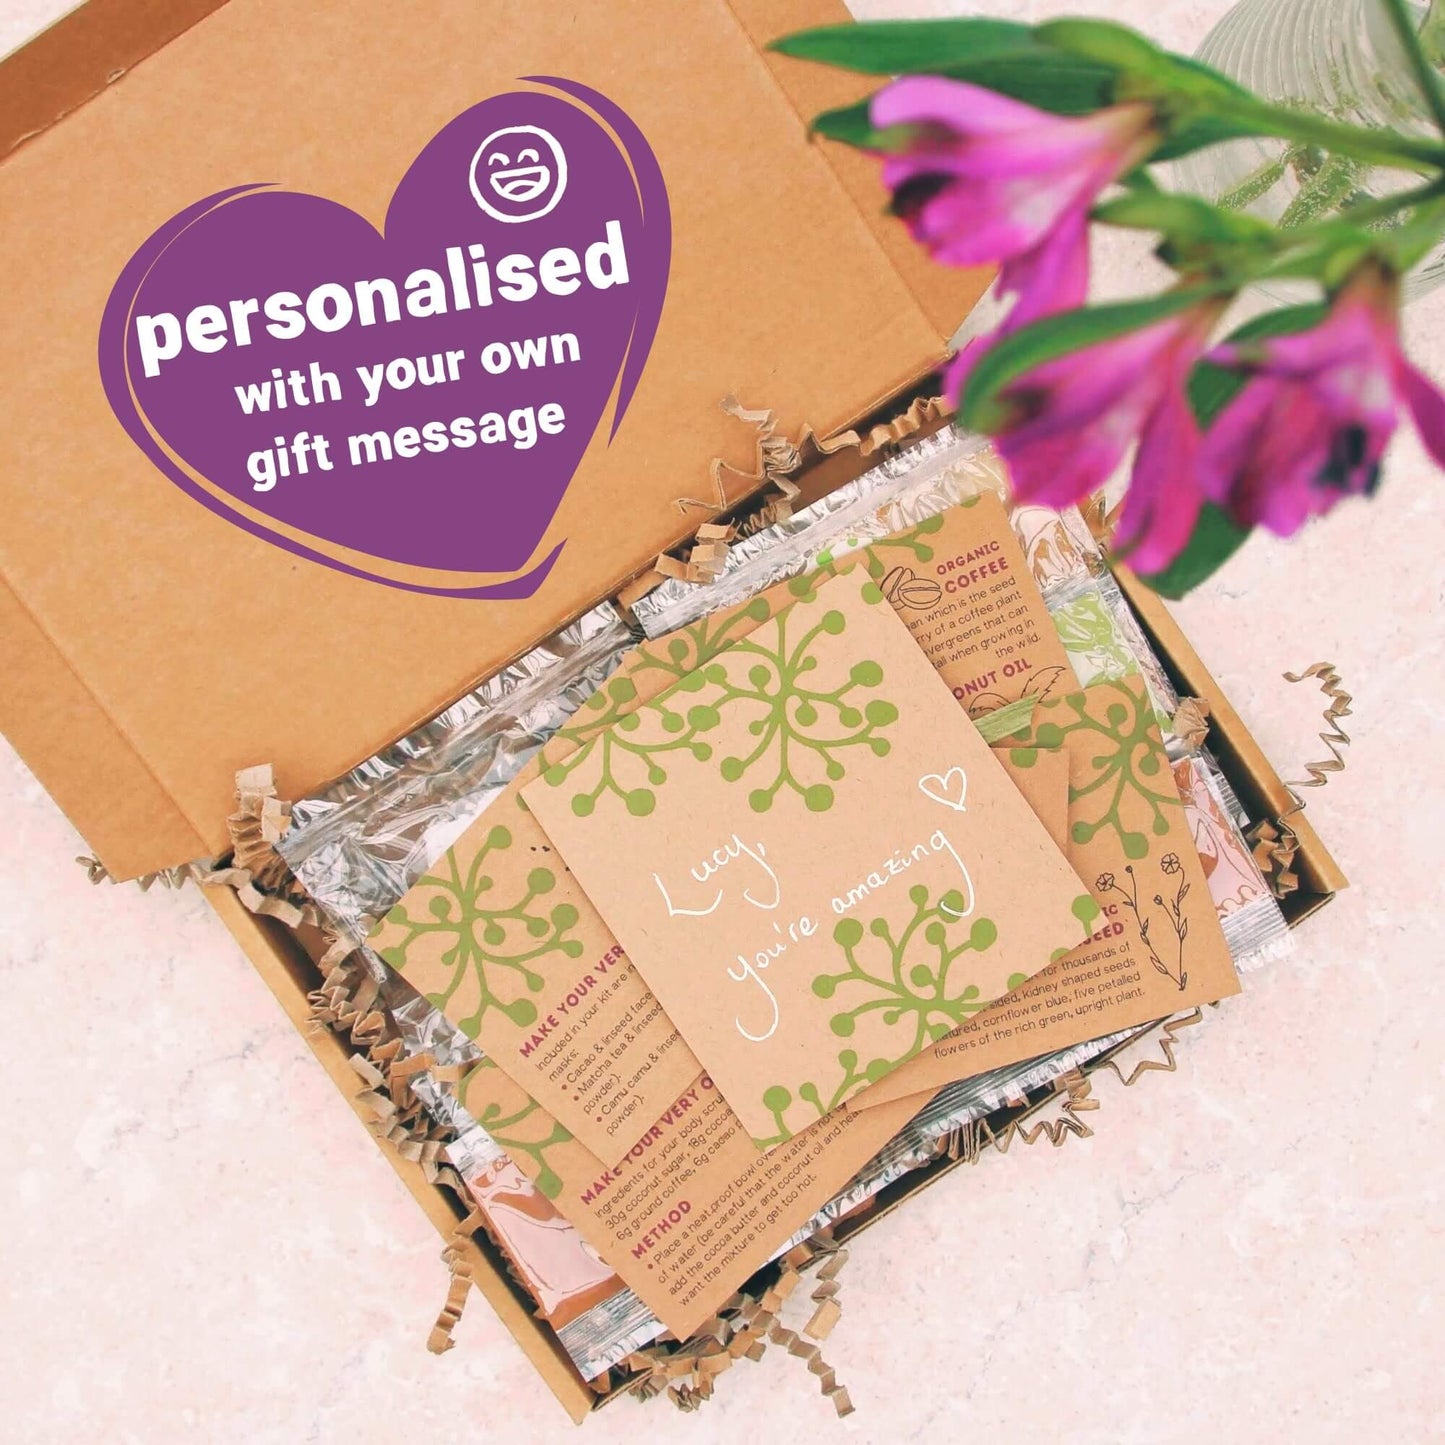 pamper letterbox gift with personalised gift message inside